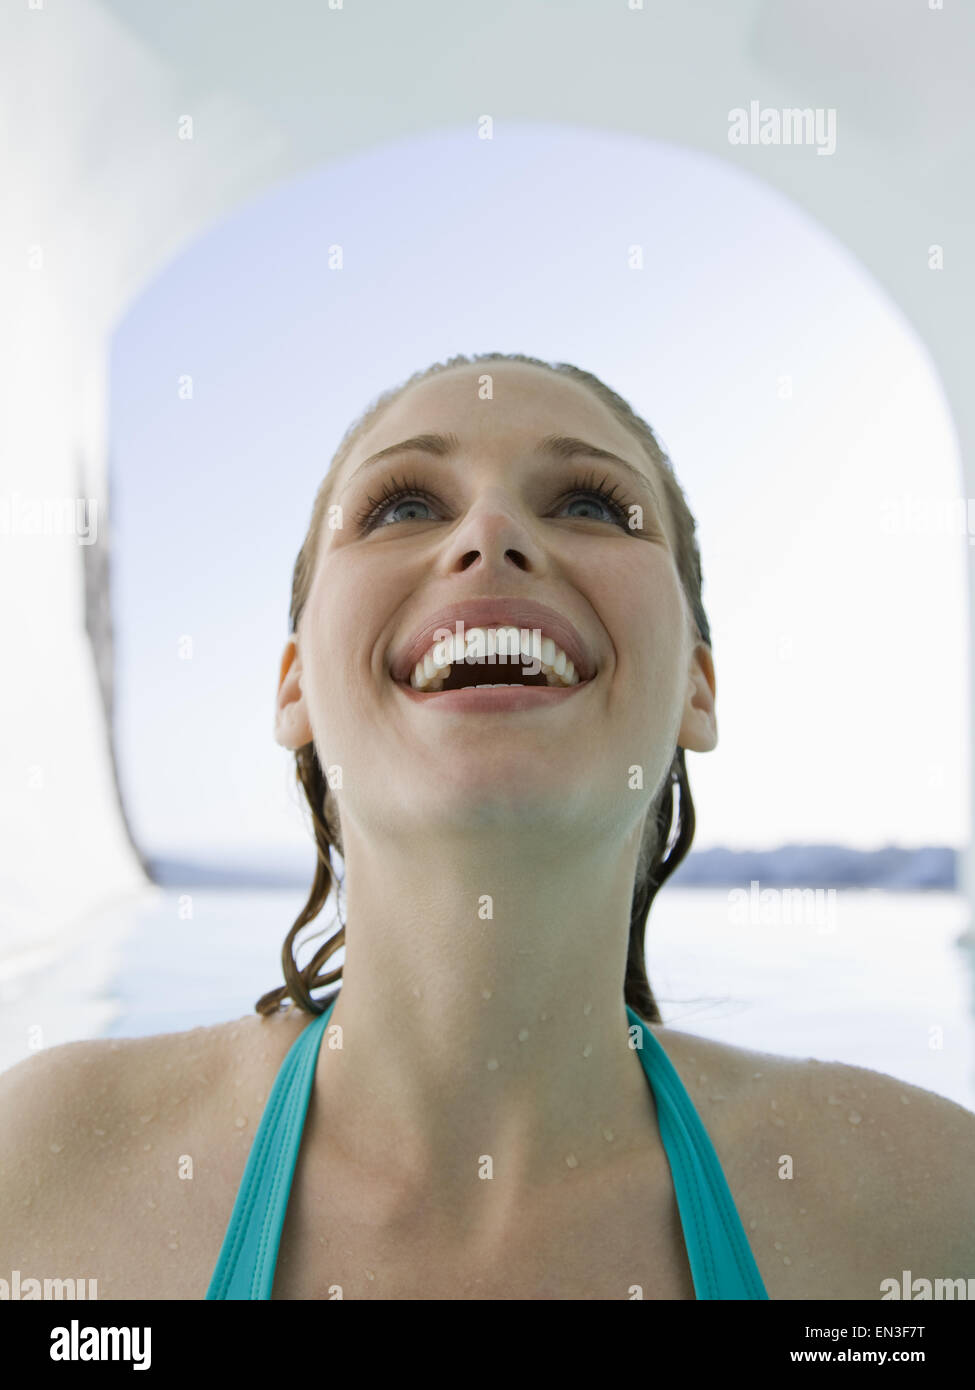 Woman in bathing suit with wet hair smiling Stock Photo